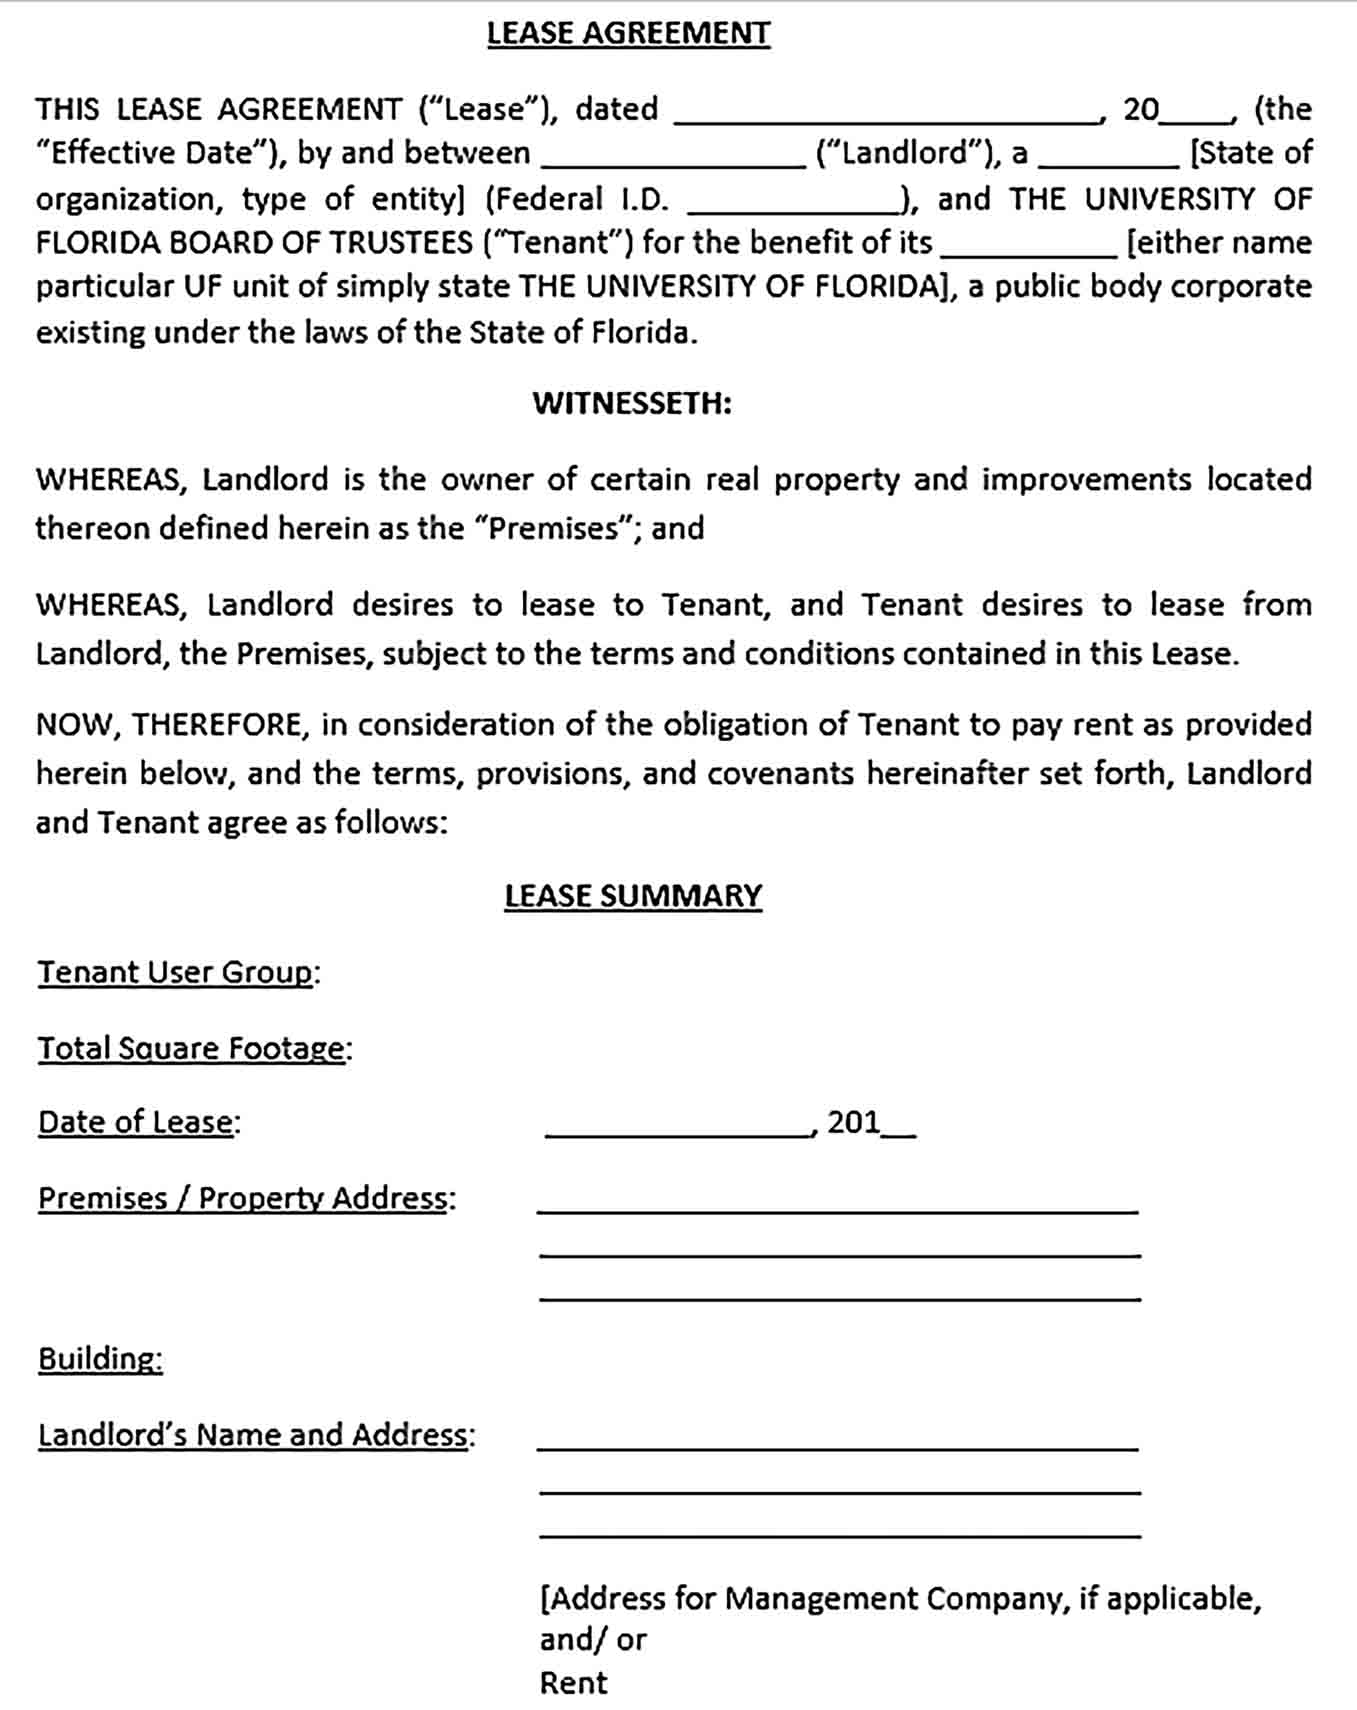 Sample Real Estate Lease Agreement